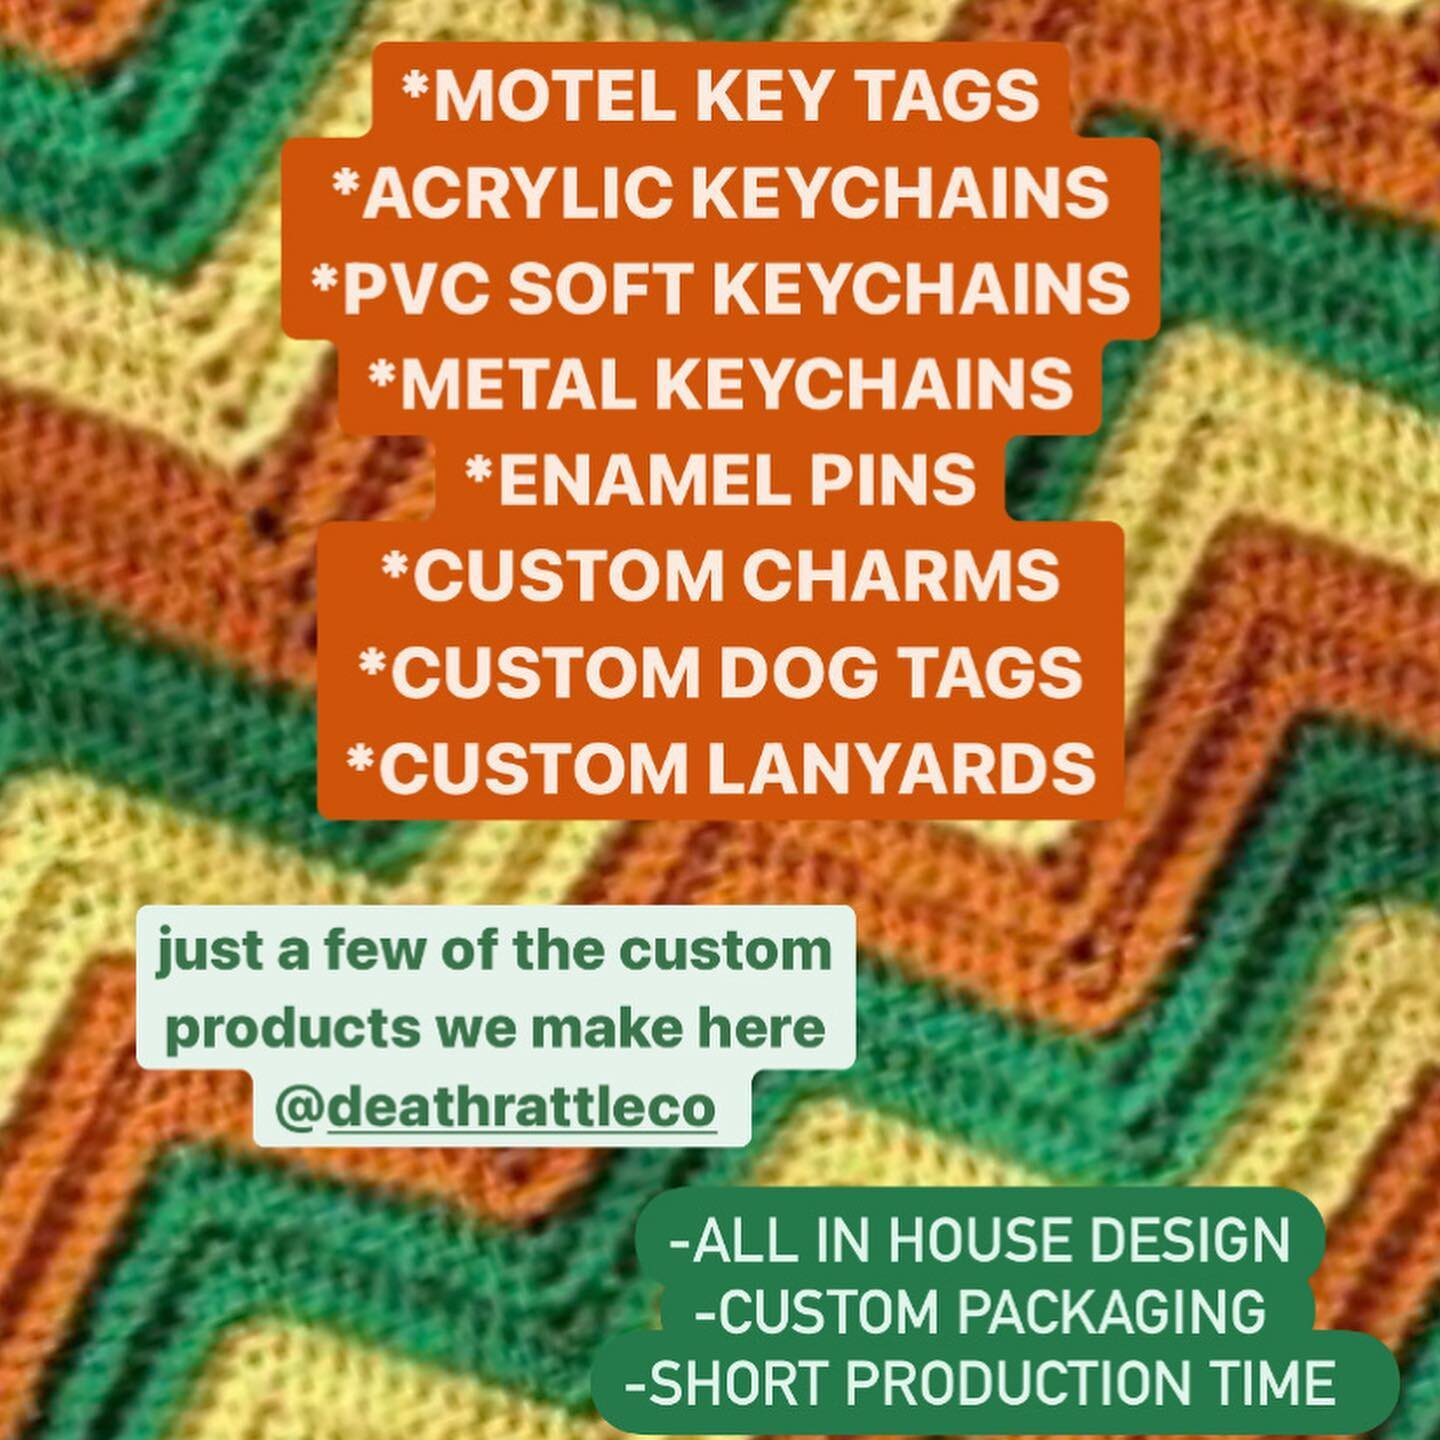 As your custom accessory plug 🔌 Here to remind you of all the stuff we make here @deathrattleco 

Chances are if you are looking for *custom, wholesale* products &amp; accessories - I can make it or I can source a manufacturer to do so!

Beyond all 